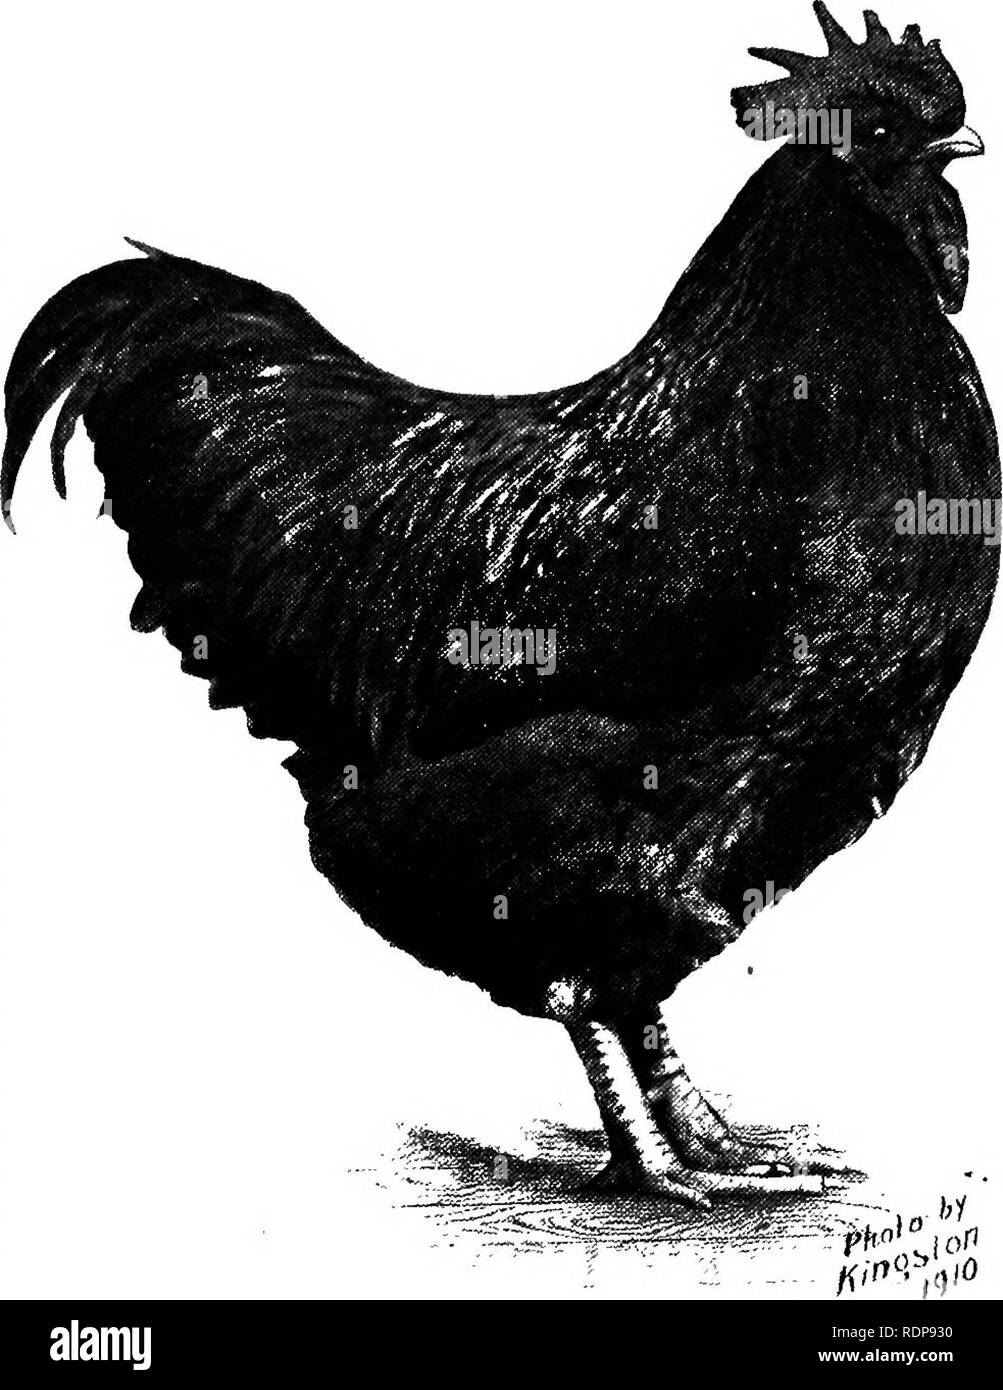 . Standard-bred Orpingtons, black, buff and white, their practical qualities; the standard requirements; how to judge them; how to mate and breed for best results, with a chapter on new non-standard varieties. Orpington chicken. THE ORPINGTONS 41 succeeding matings. As a rule the male will influence the color and type more than the -female does, while the latter influences the size. For this reason I would prefer a smallish male of really good type to a tall gawky male having nothing but size and color to recommend him. Among the first principles of color mating there are a few points I wish t Stock Photo